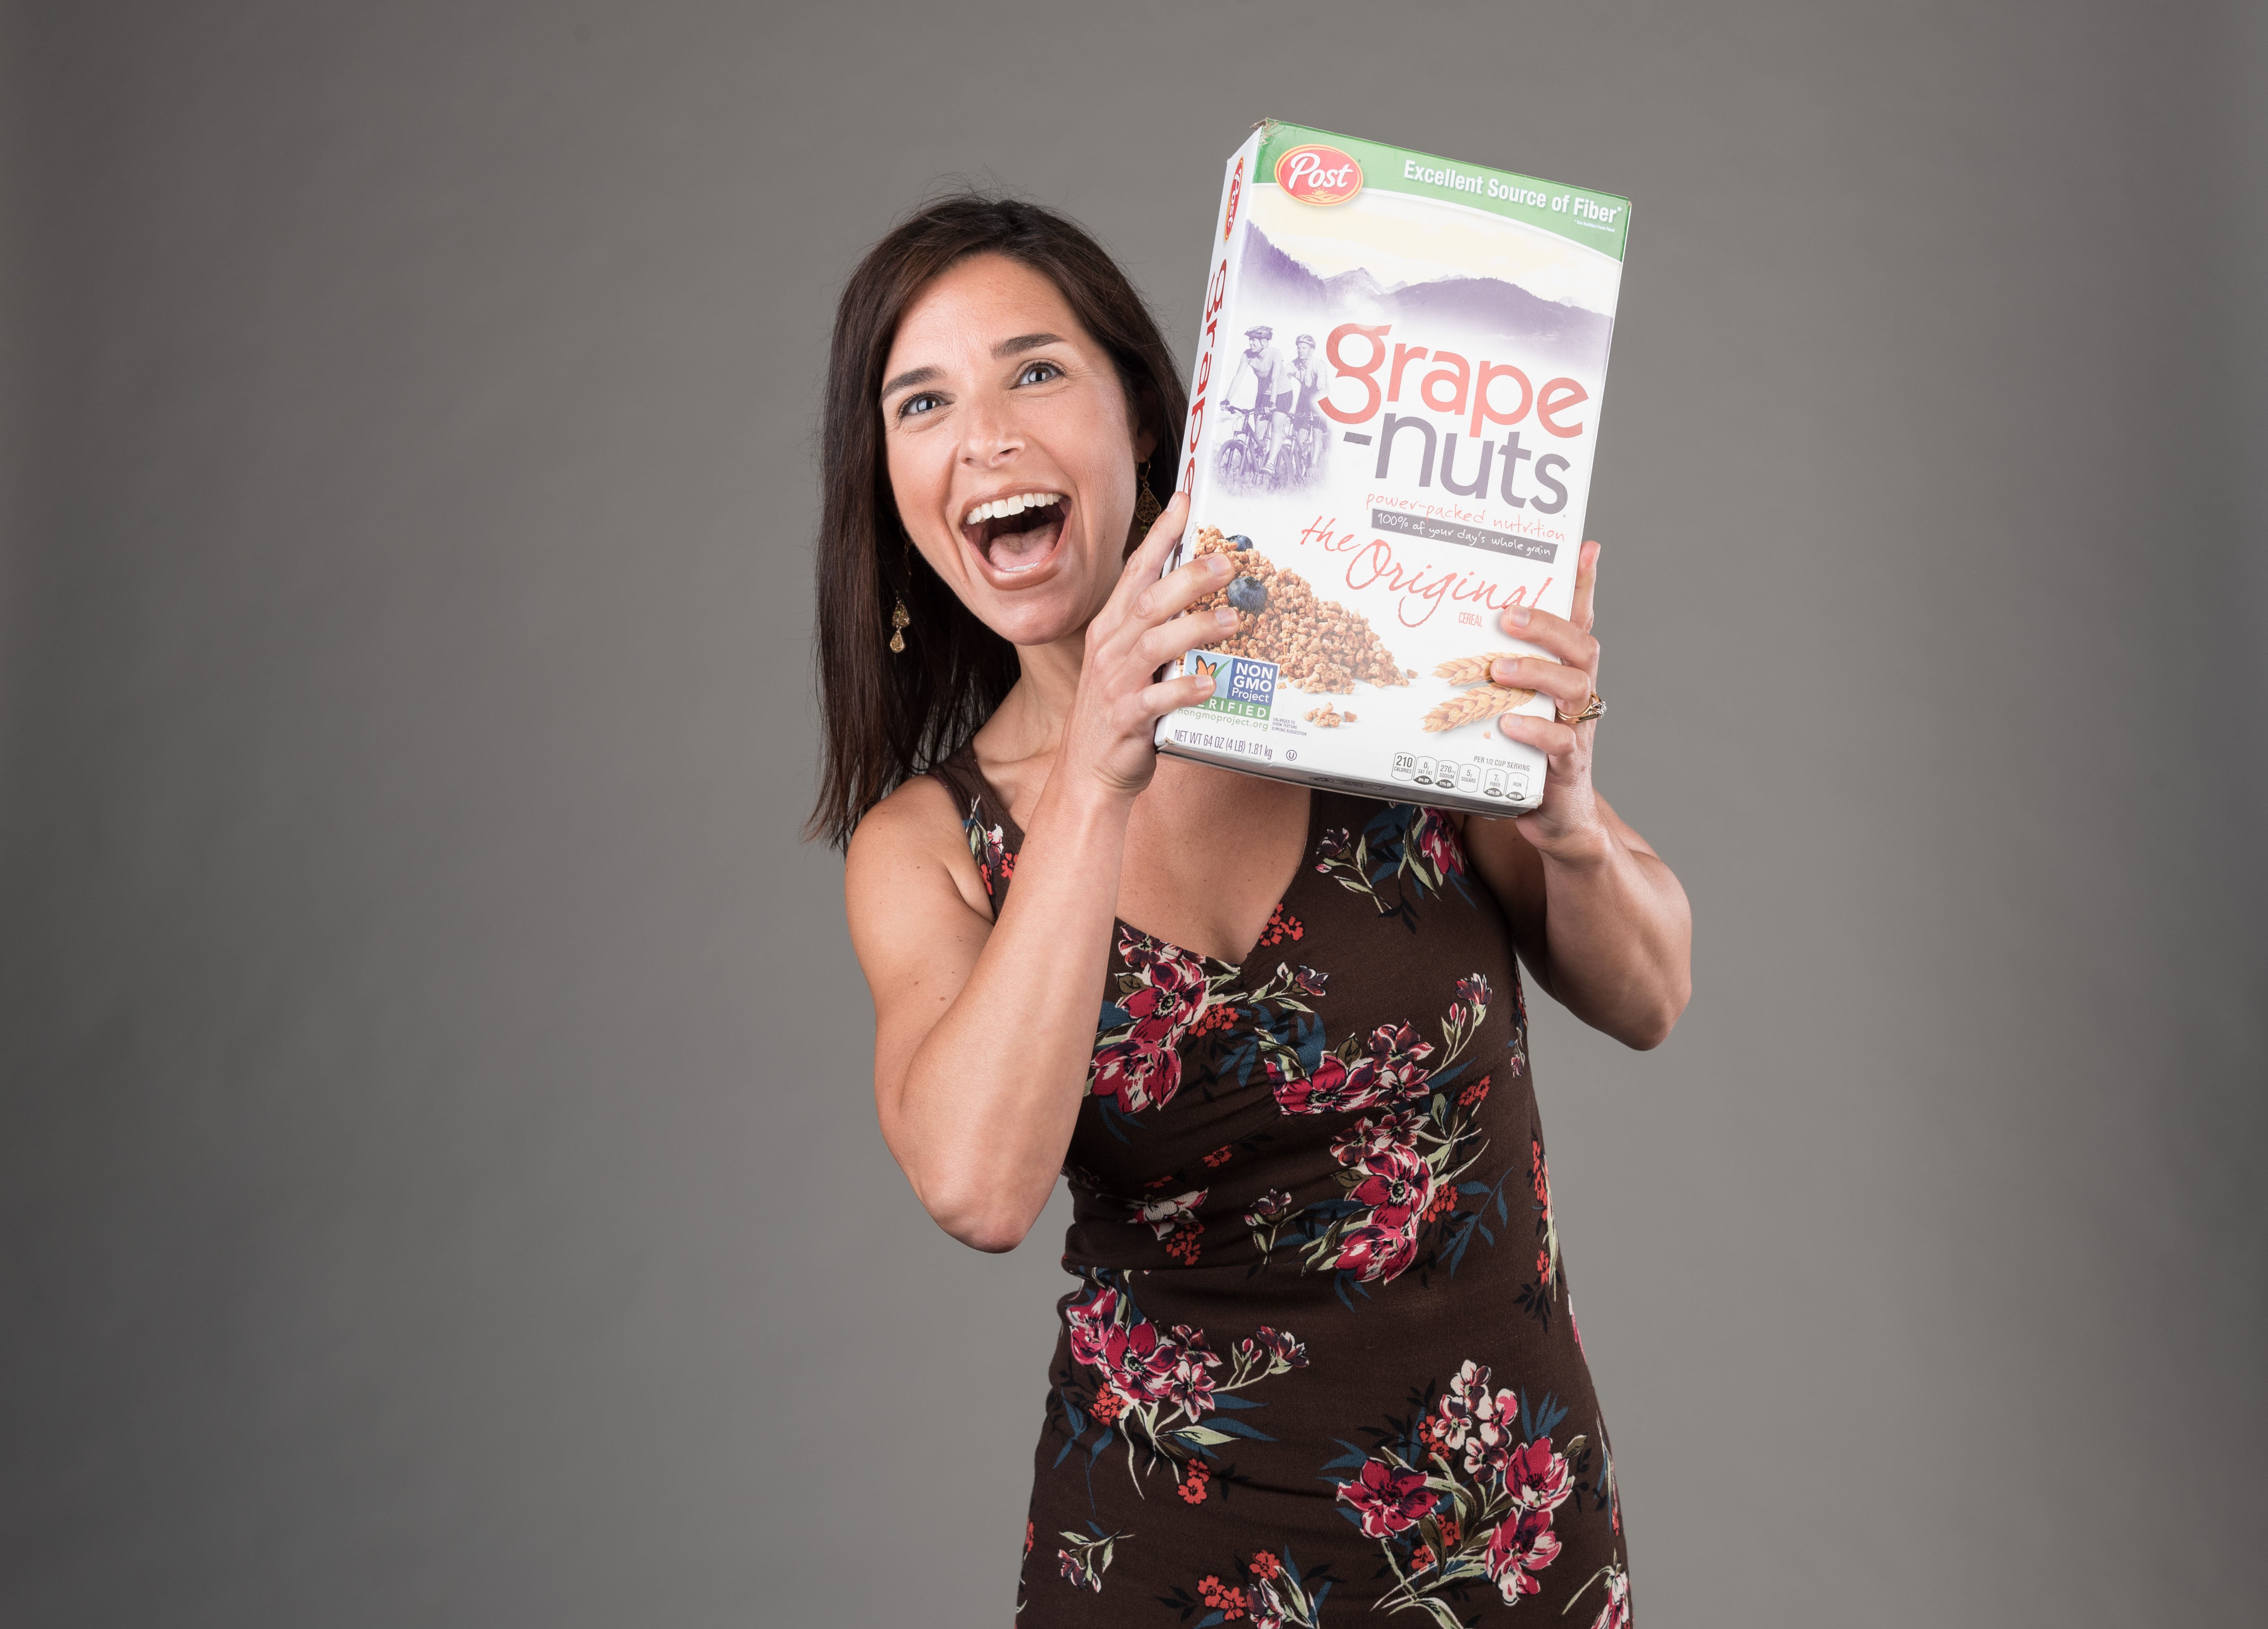 Portrait of woman holding cereal box